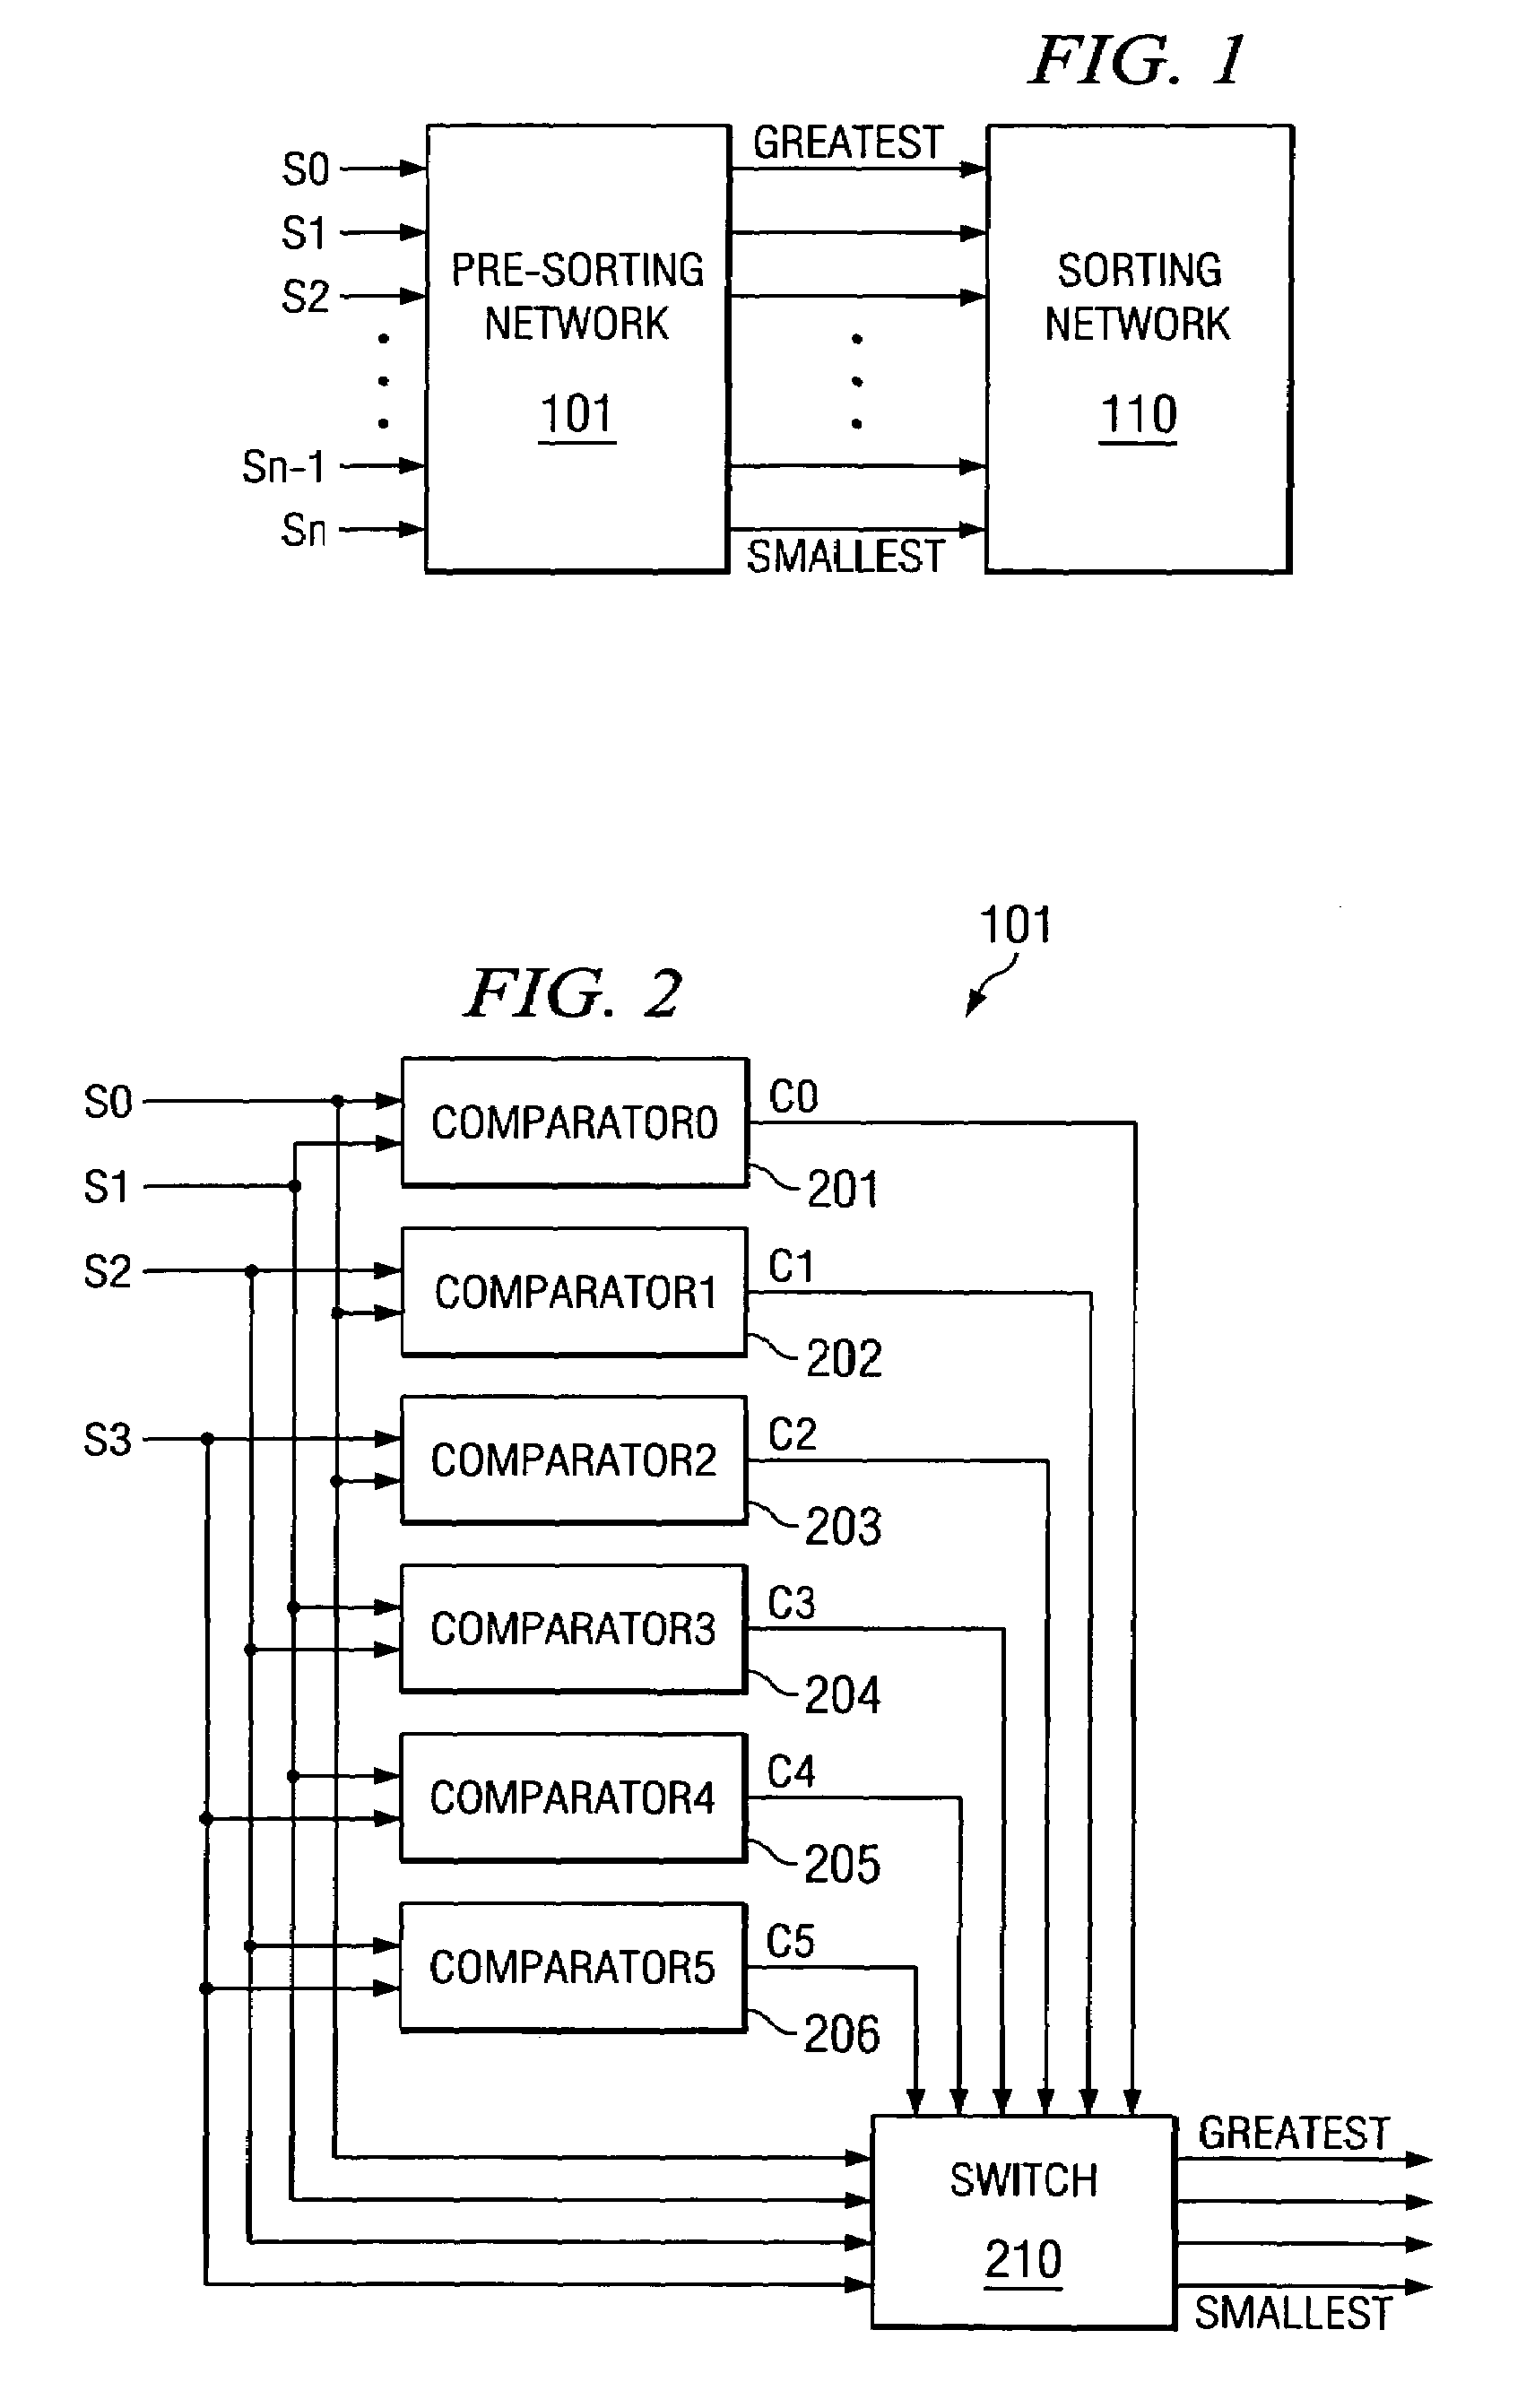 VLSI architecture and implementation for single cycle insertion of multiple records into a priority sorted list